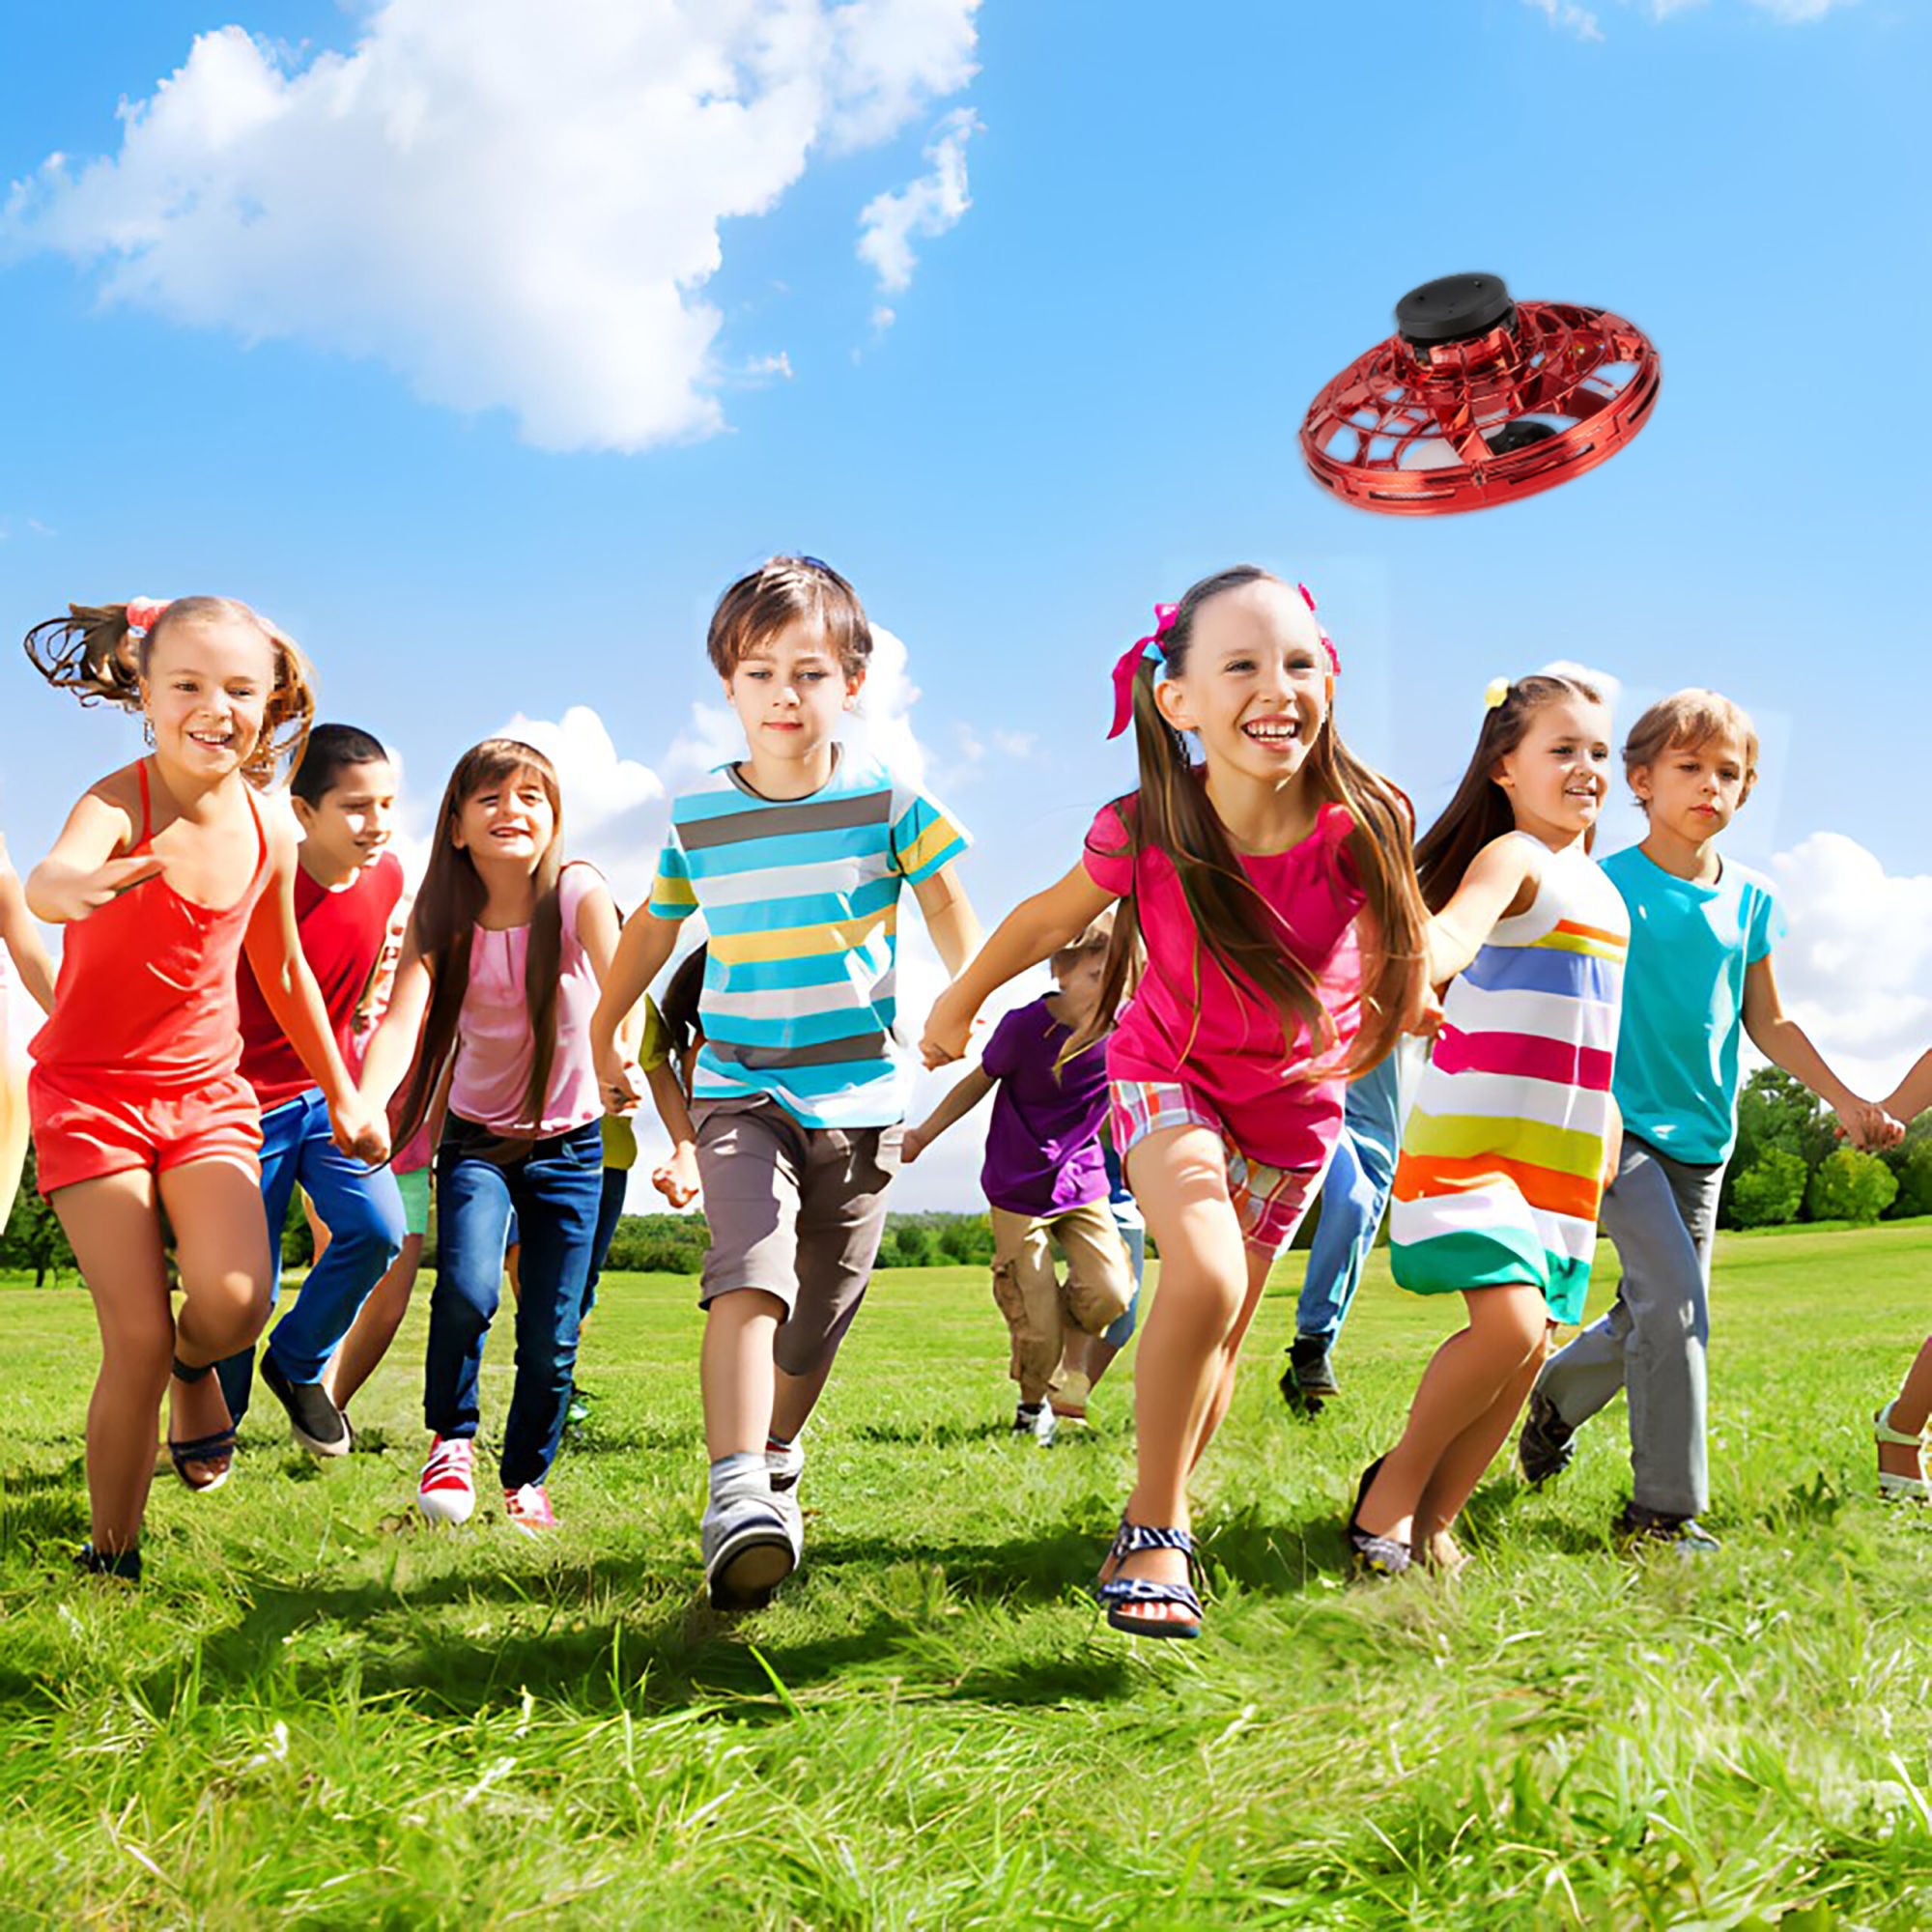 Children playing tag in a lush green park, with one girl in blue shorts reaching to tag a boy in a striped shirt, while a Glow Drone 360 Flying Toy with LED lights hovers above.